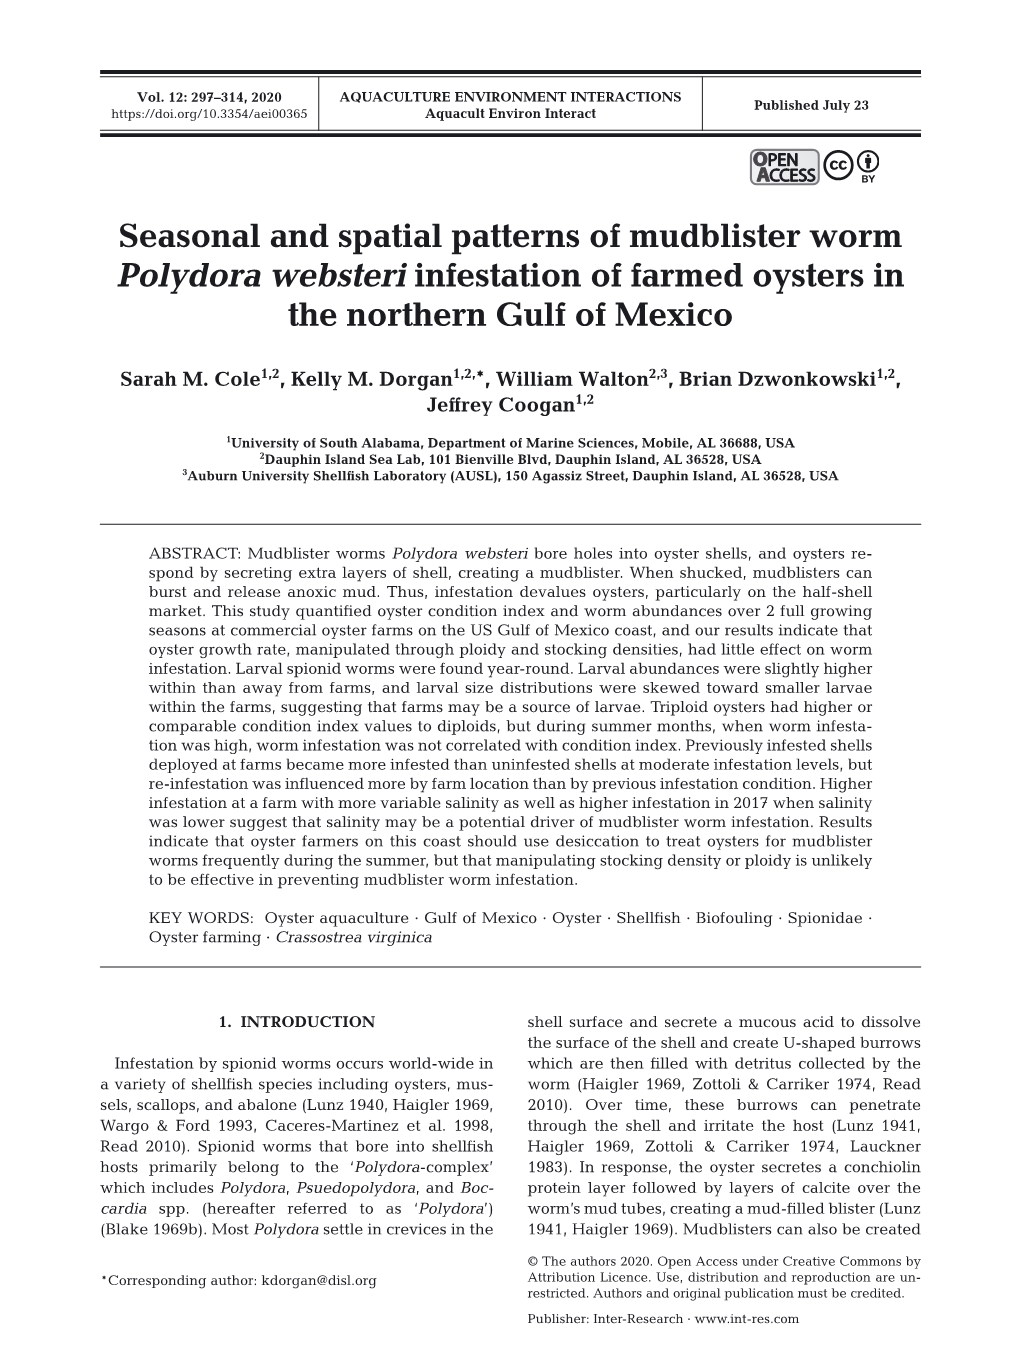 Seasonal and Spatial Patterns of Mudblister Worm Polydora Websteri Infestation of Farmed Oysters in the Northern Gulf of Mexico